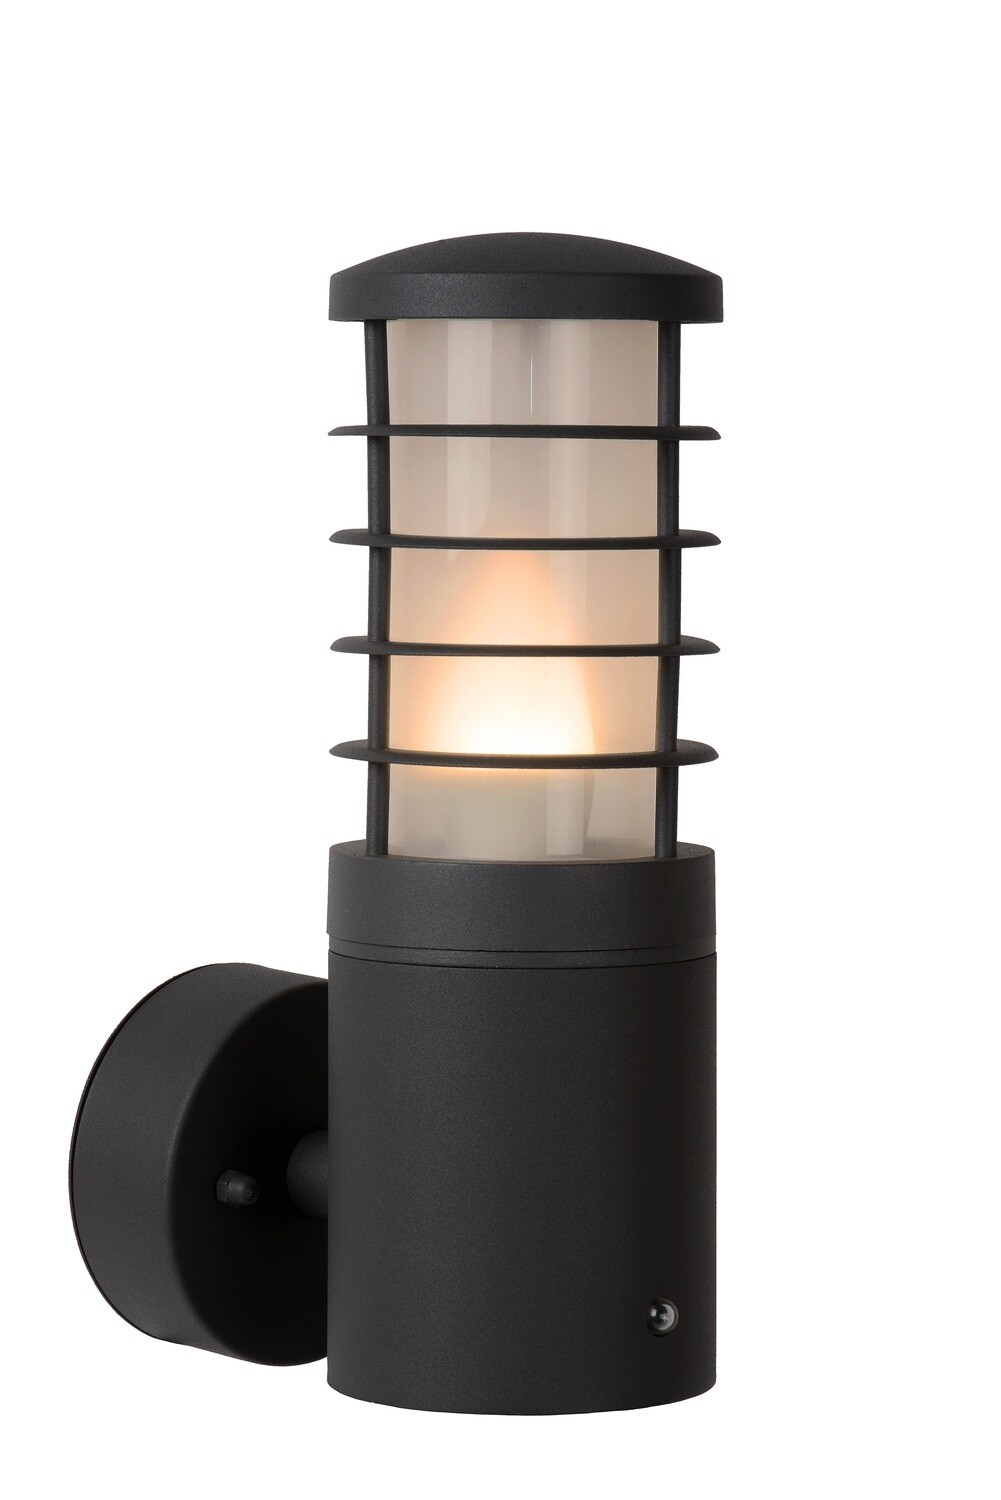 SOLID Wall light Outdoor 1xE27 IP54 Anthracite with day/night sensor